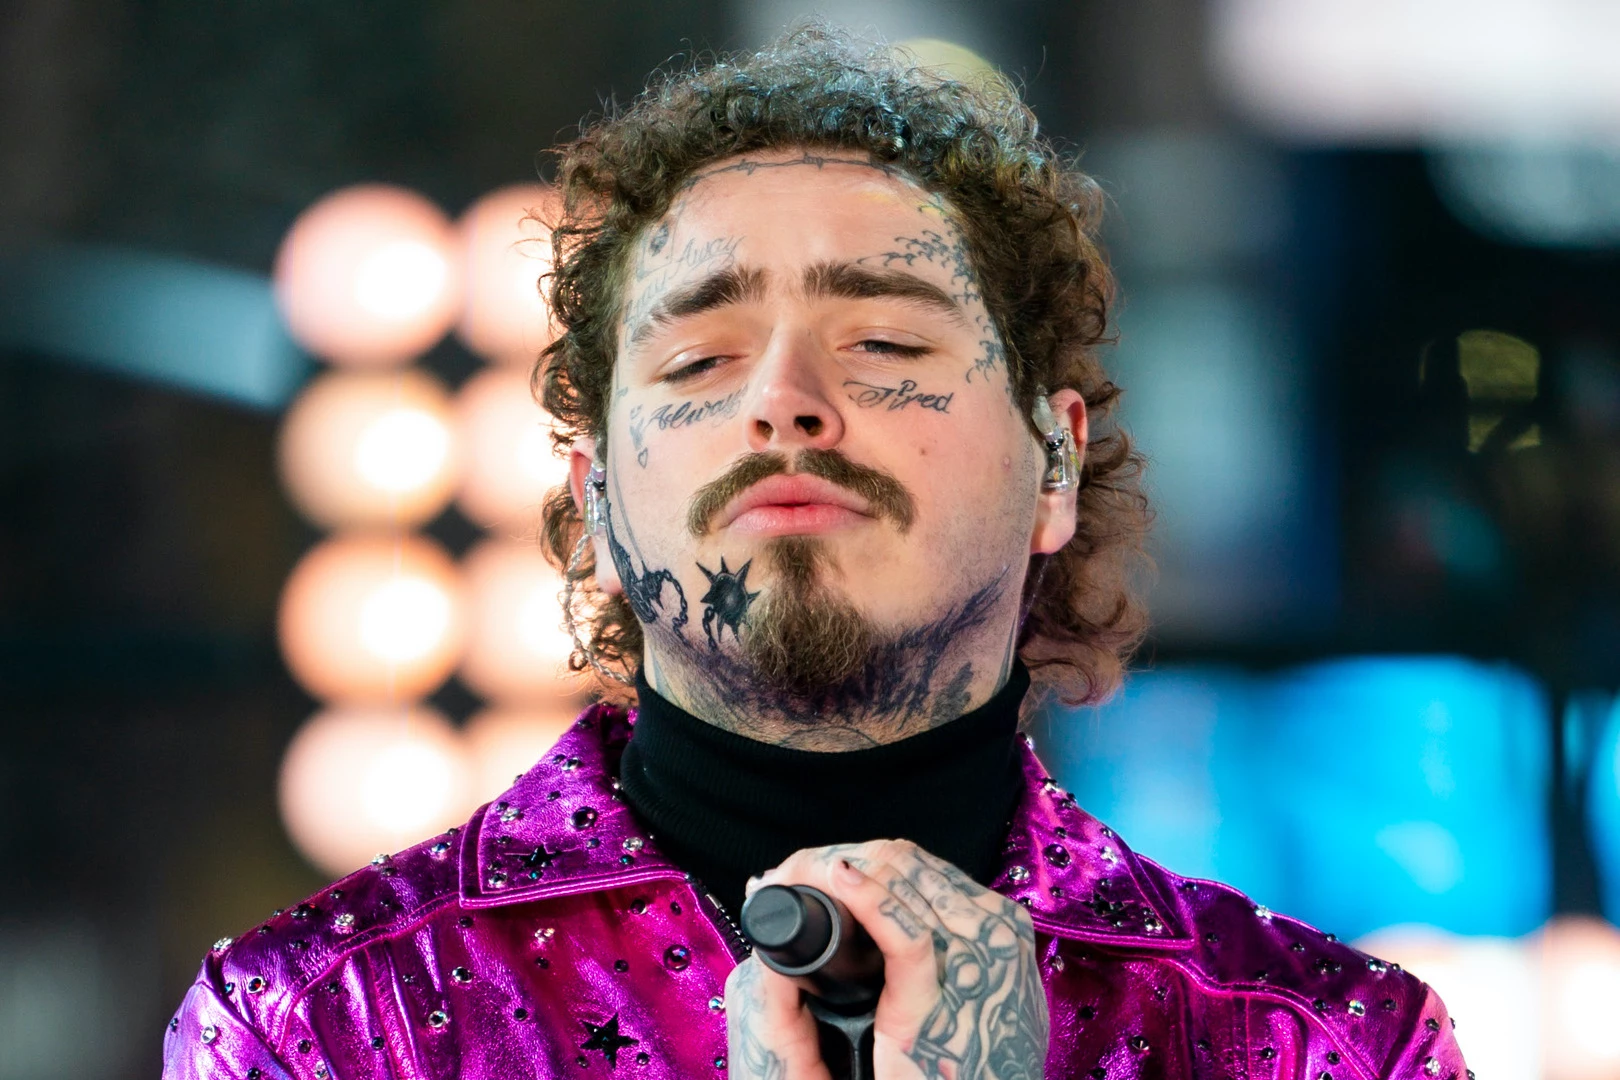 Does Post Malone have room on his face for a Dallas Cowboys 88 tattoo  Yes he does